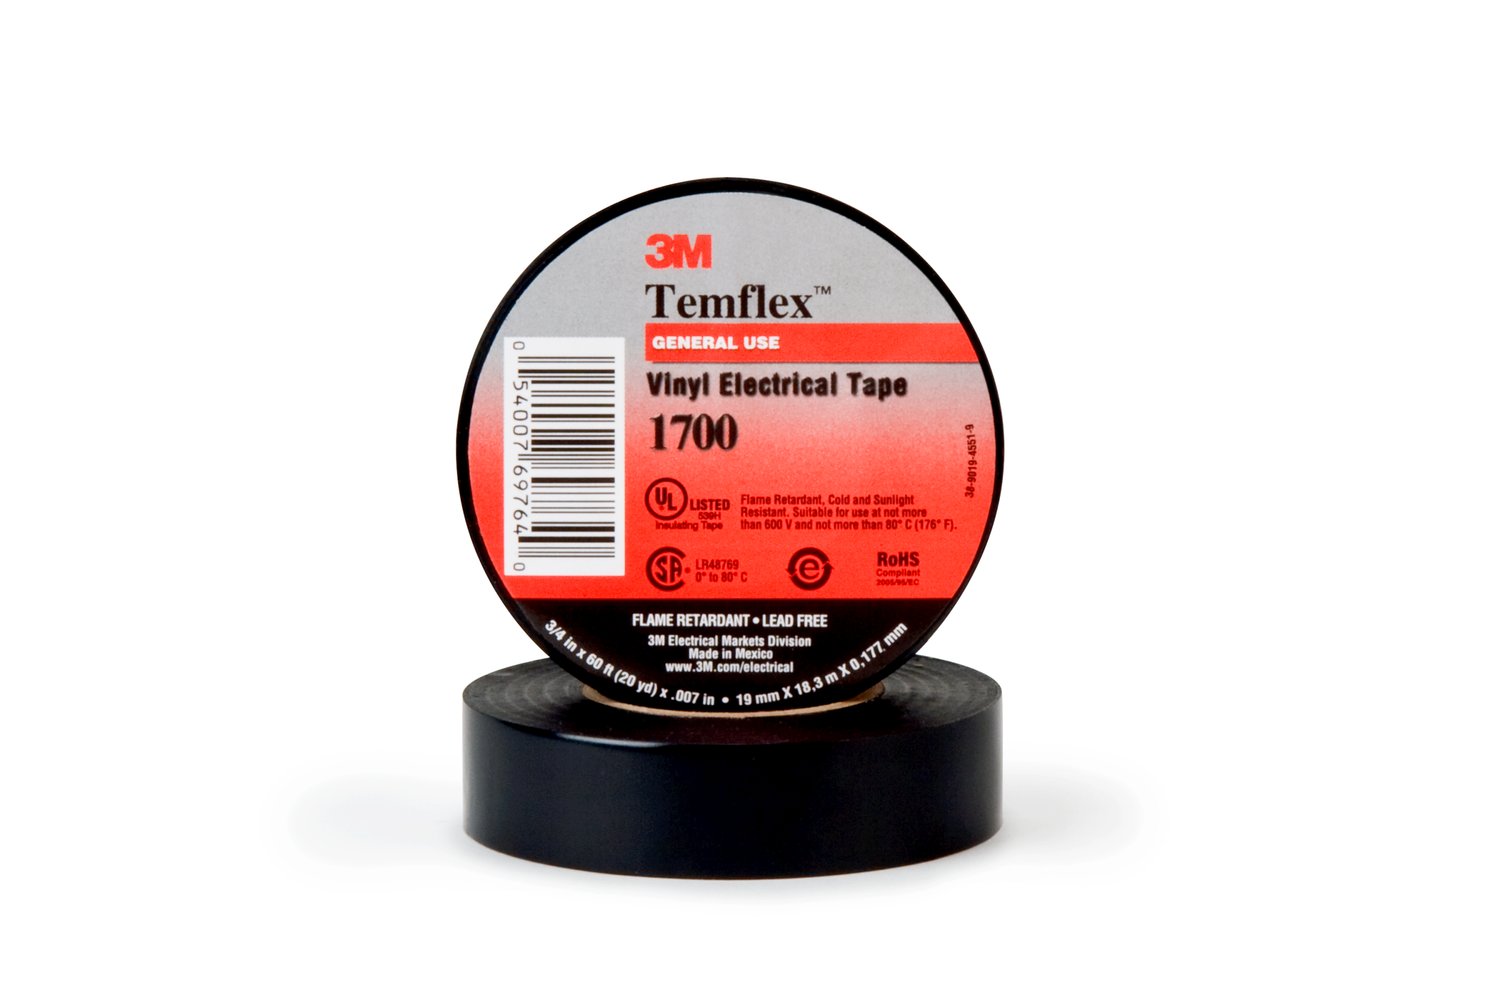 3/4" 3M Temflex General Use Vinyl Electrical Tape with Non-Thermosetting Rubber Adhesive, black, 3/4" wide x  60 FT roll